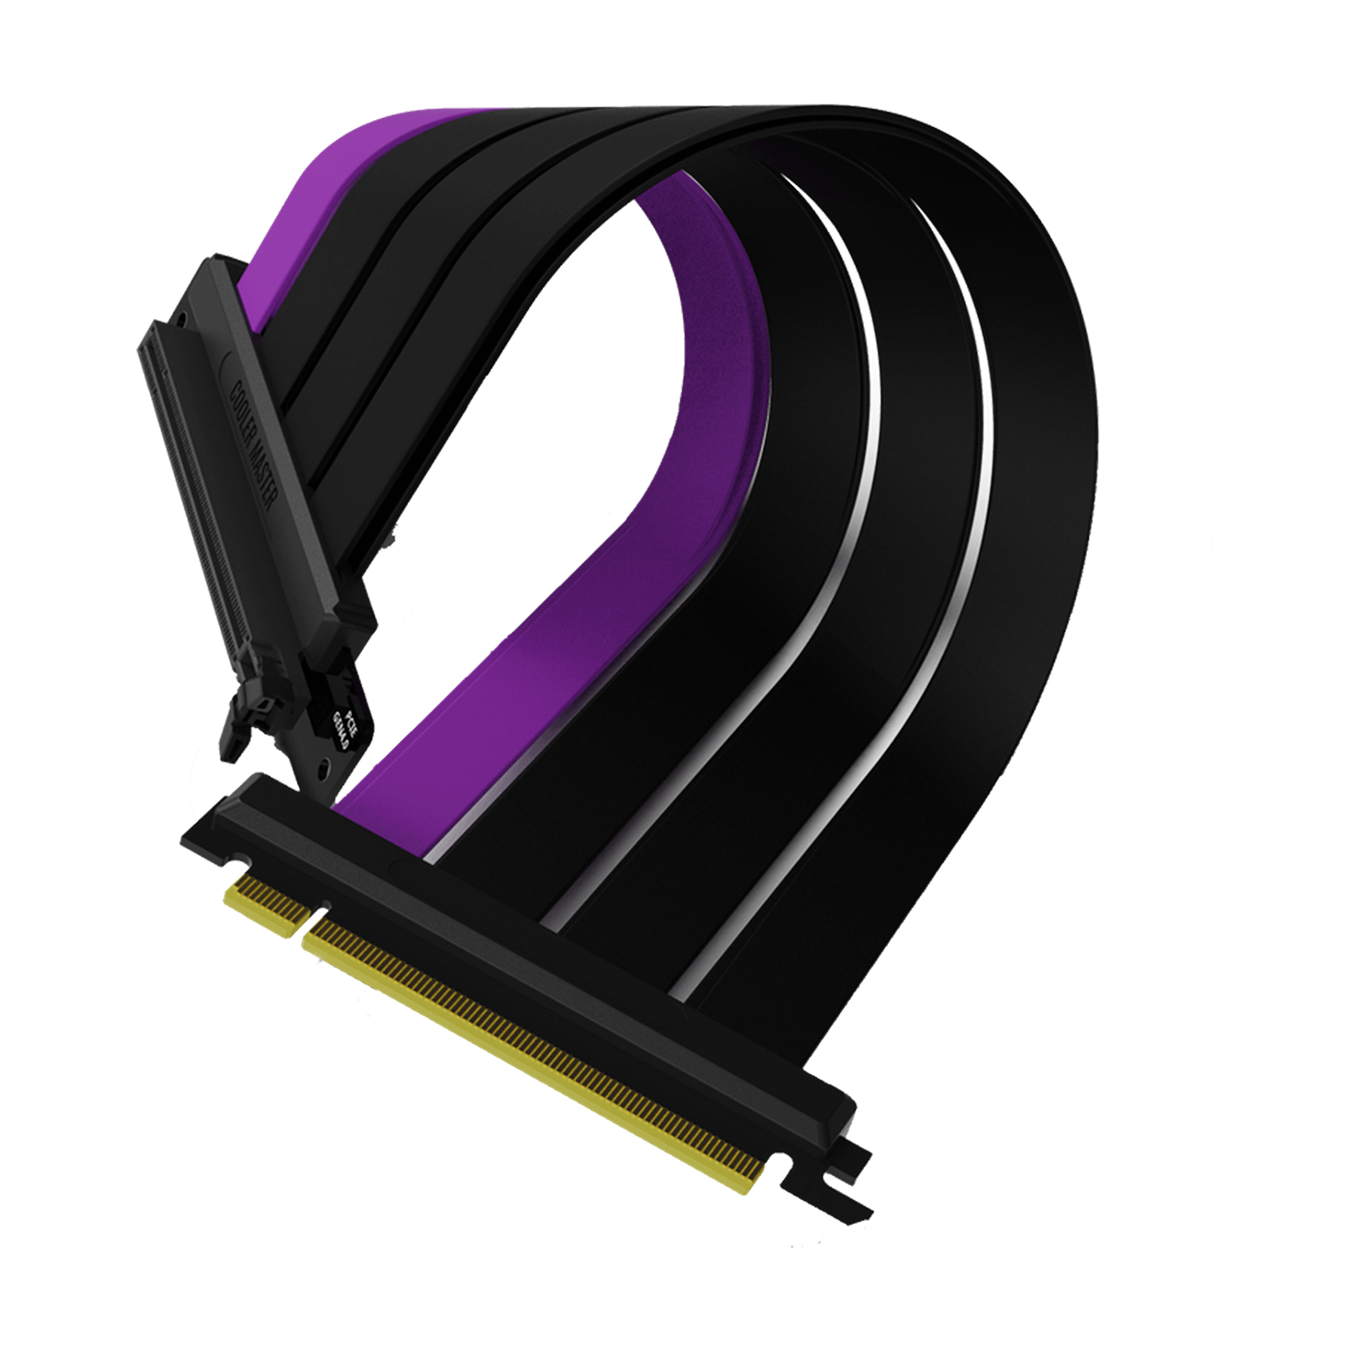 Side view of the folded Cooler Master MasterAccessory PCIe 4.0 Riser Cable with three matte black cables and a single purple accent cable. 